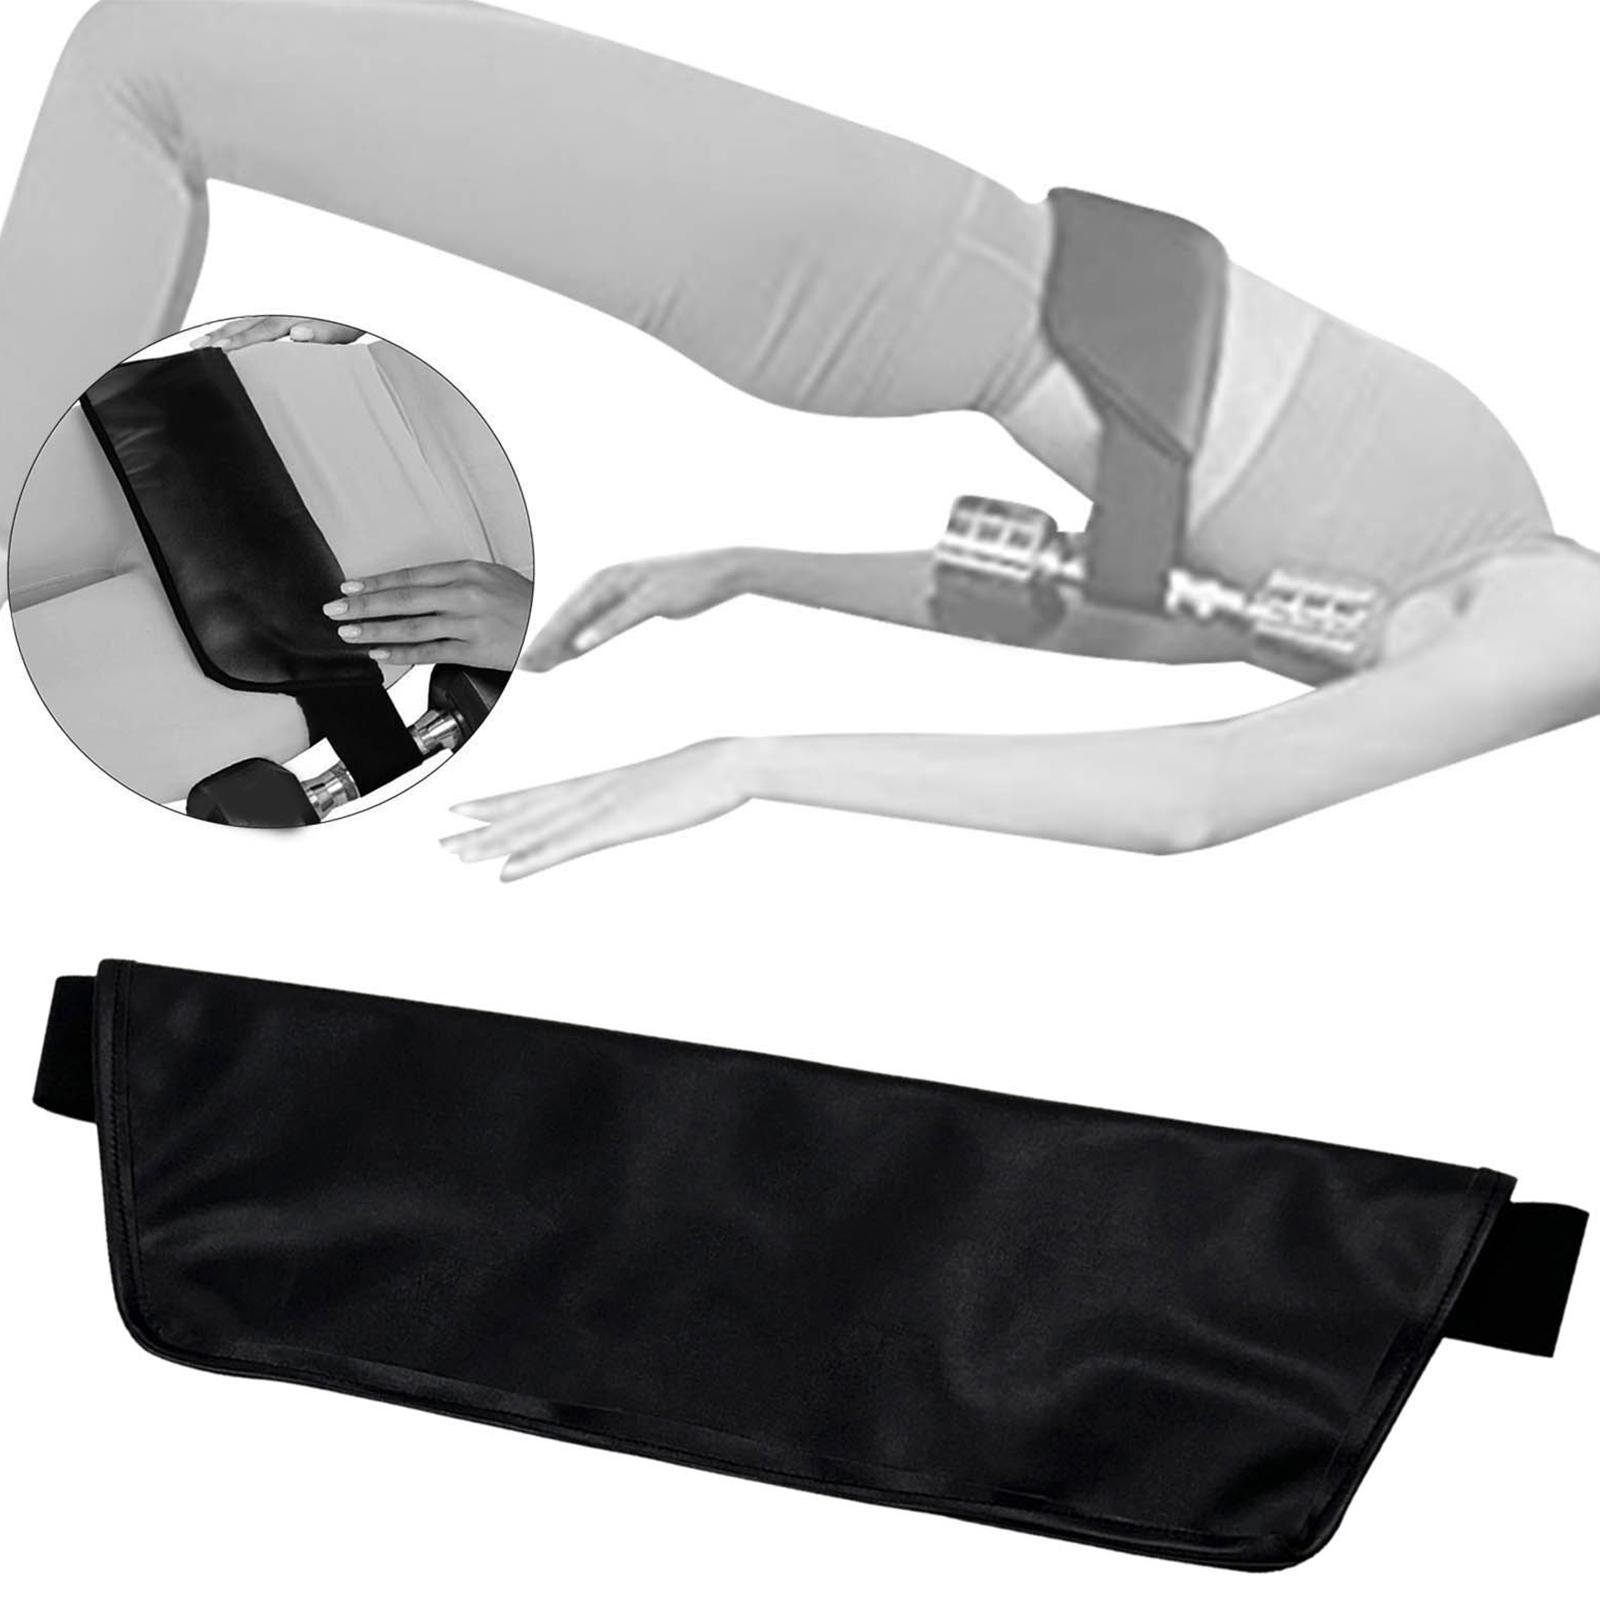 Portable Hip Thrust Belt for Hip Thrusts Exercise & Booty Workouts